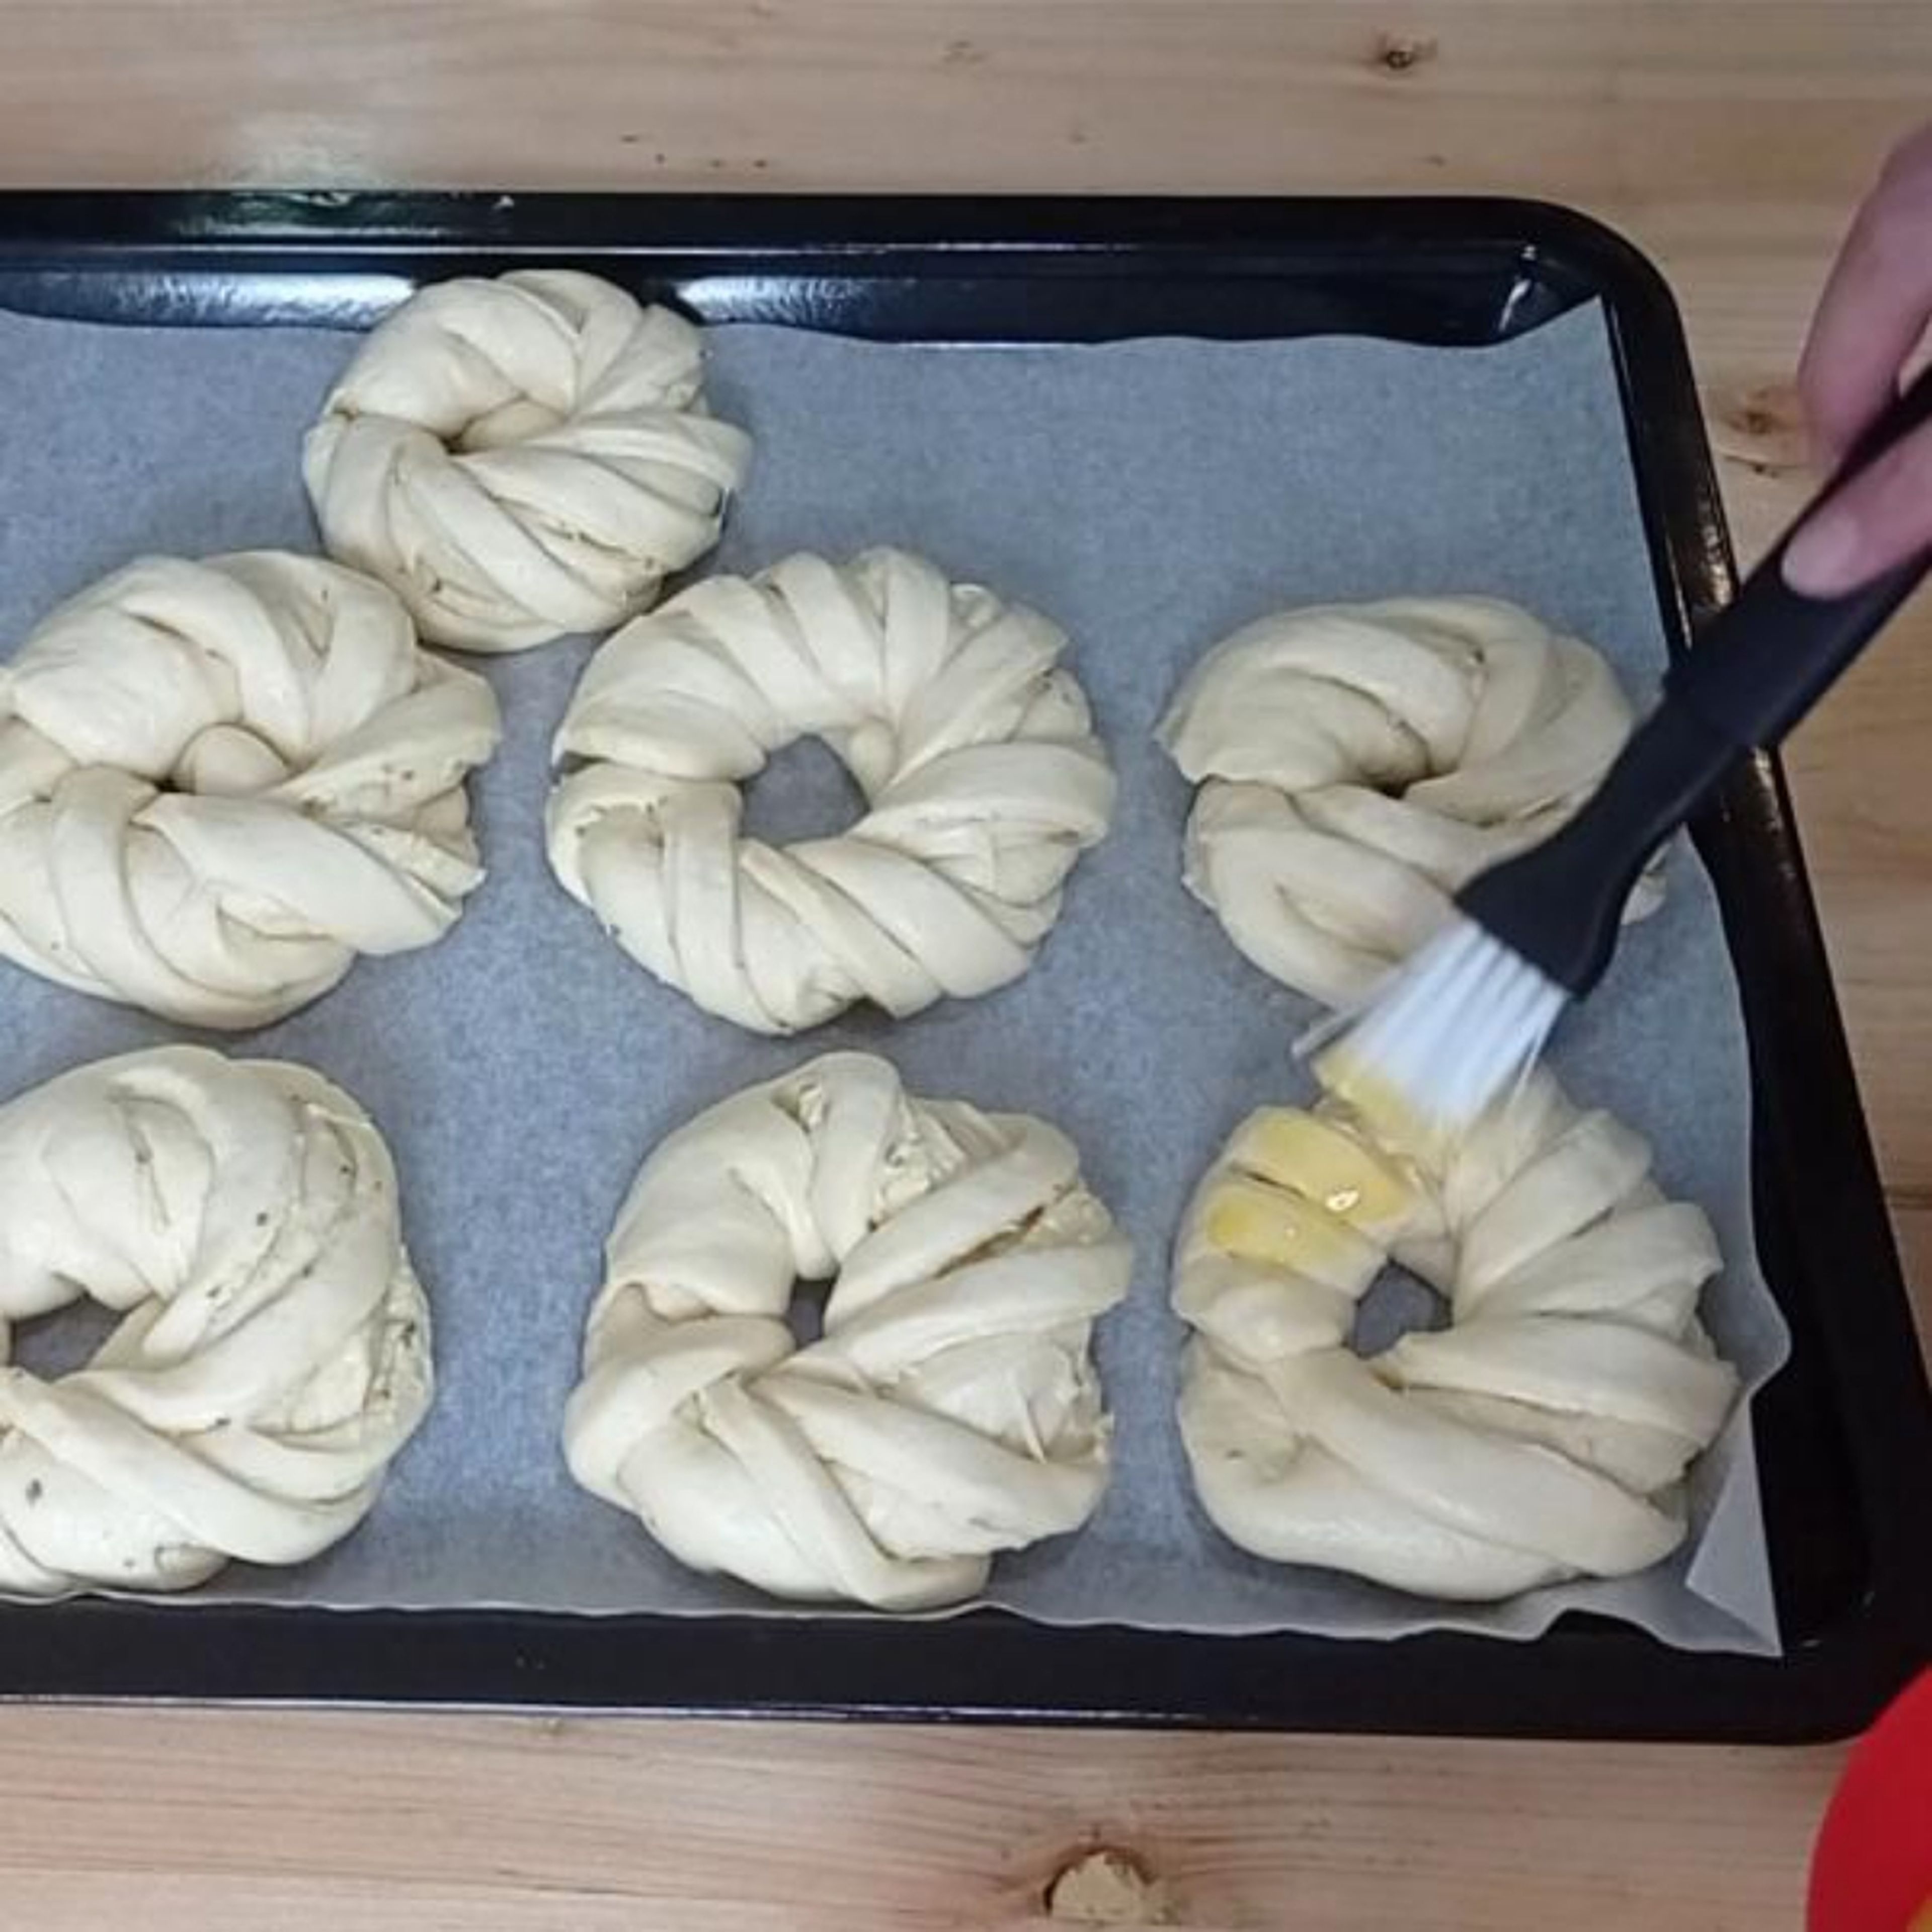 Prepared baking sheet with baking paper. Place them on the prepared baking sheet. Brush with egg wash (1 egg yolk + 1 tbsp milk) and sprinkle with sesame seeds.